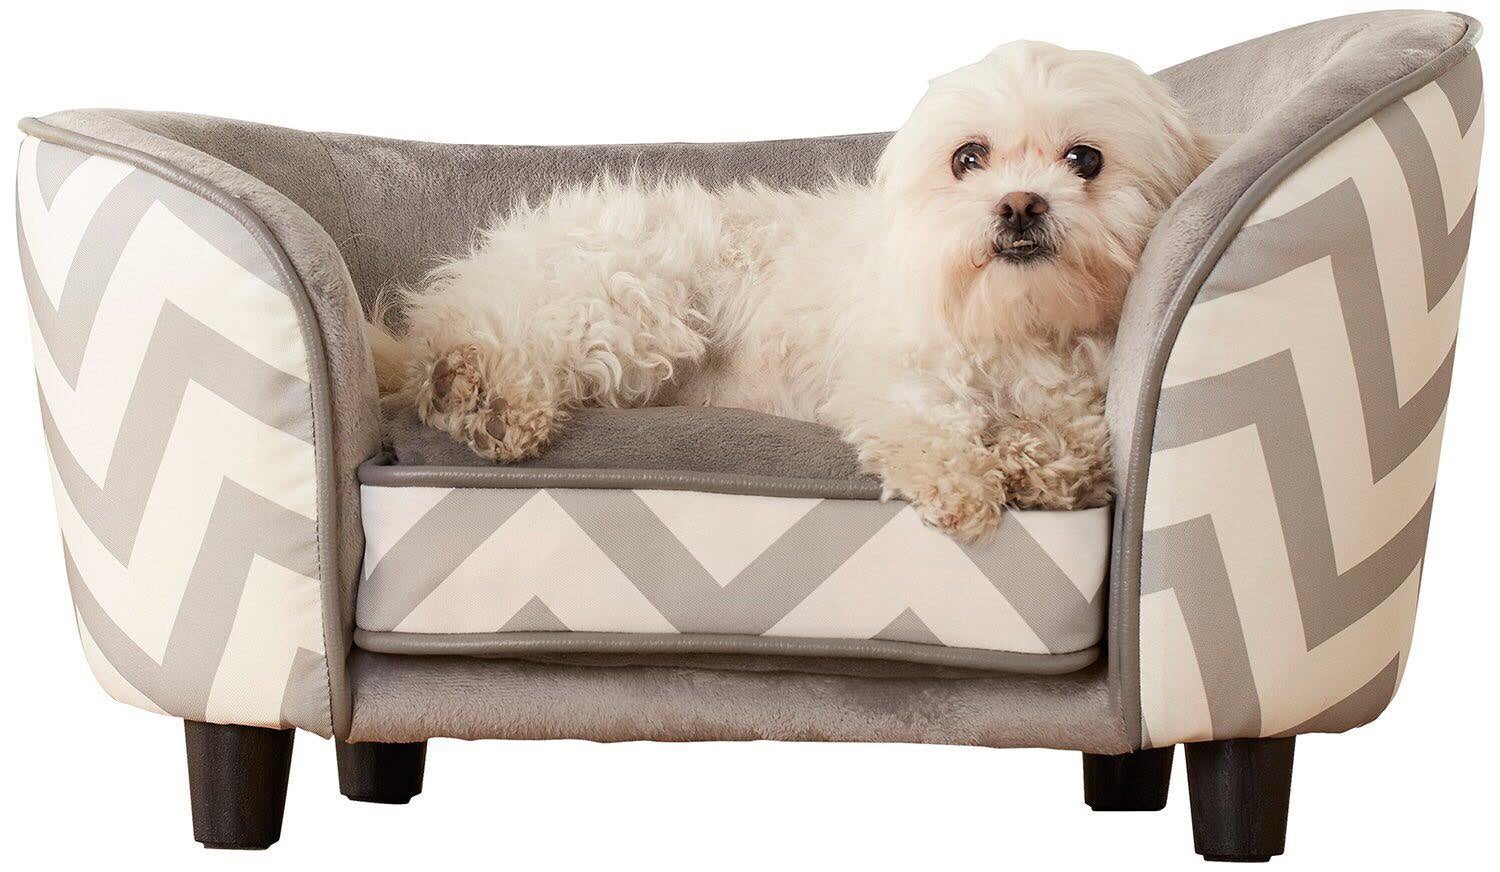 Home Windsor Pet Furniture And Accessories